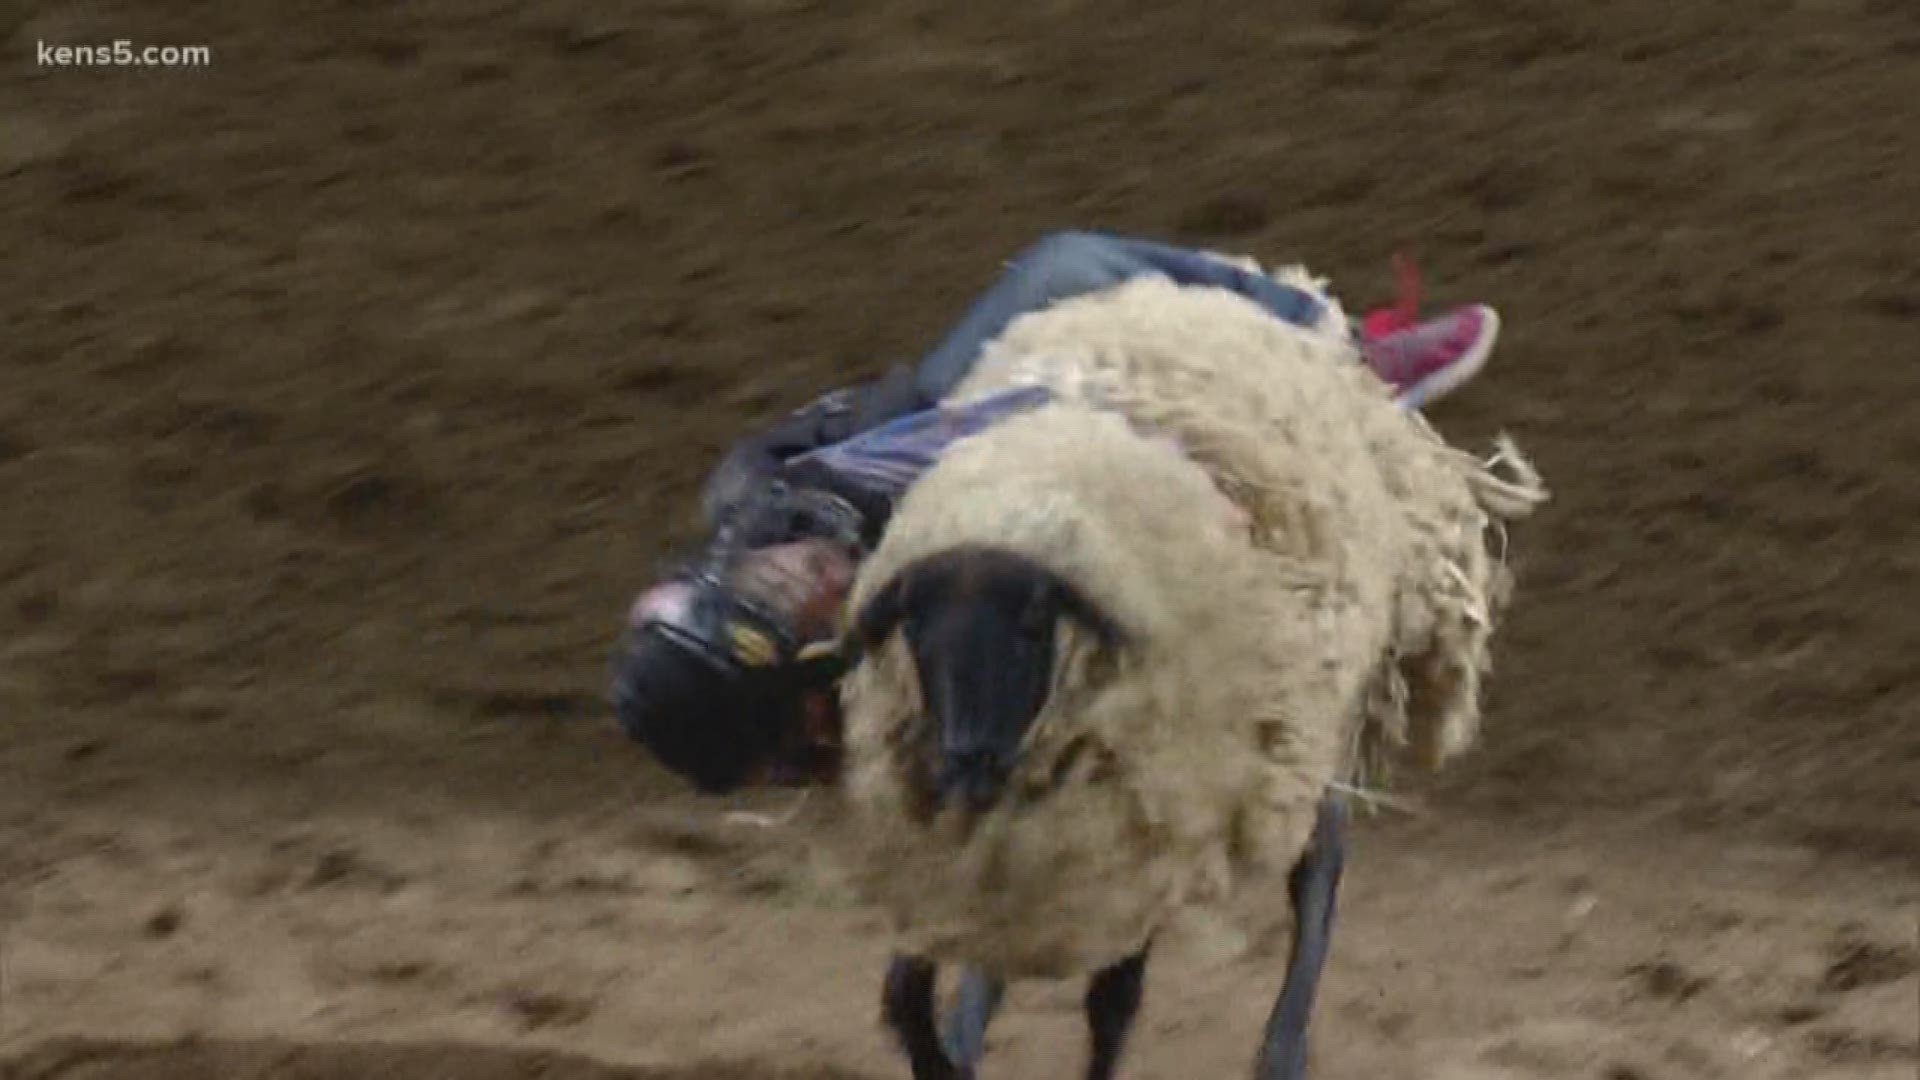 This champ didn't want to let go of the sheep, even when he was hanging on sideways!